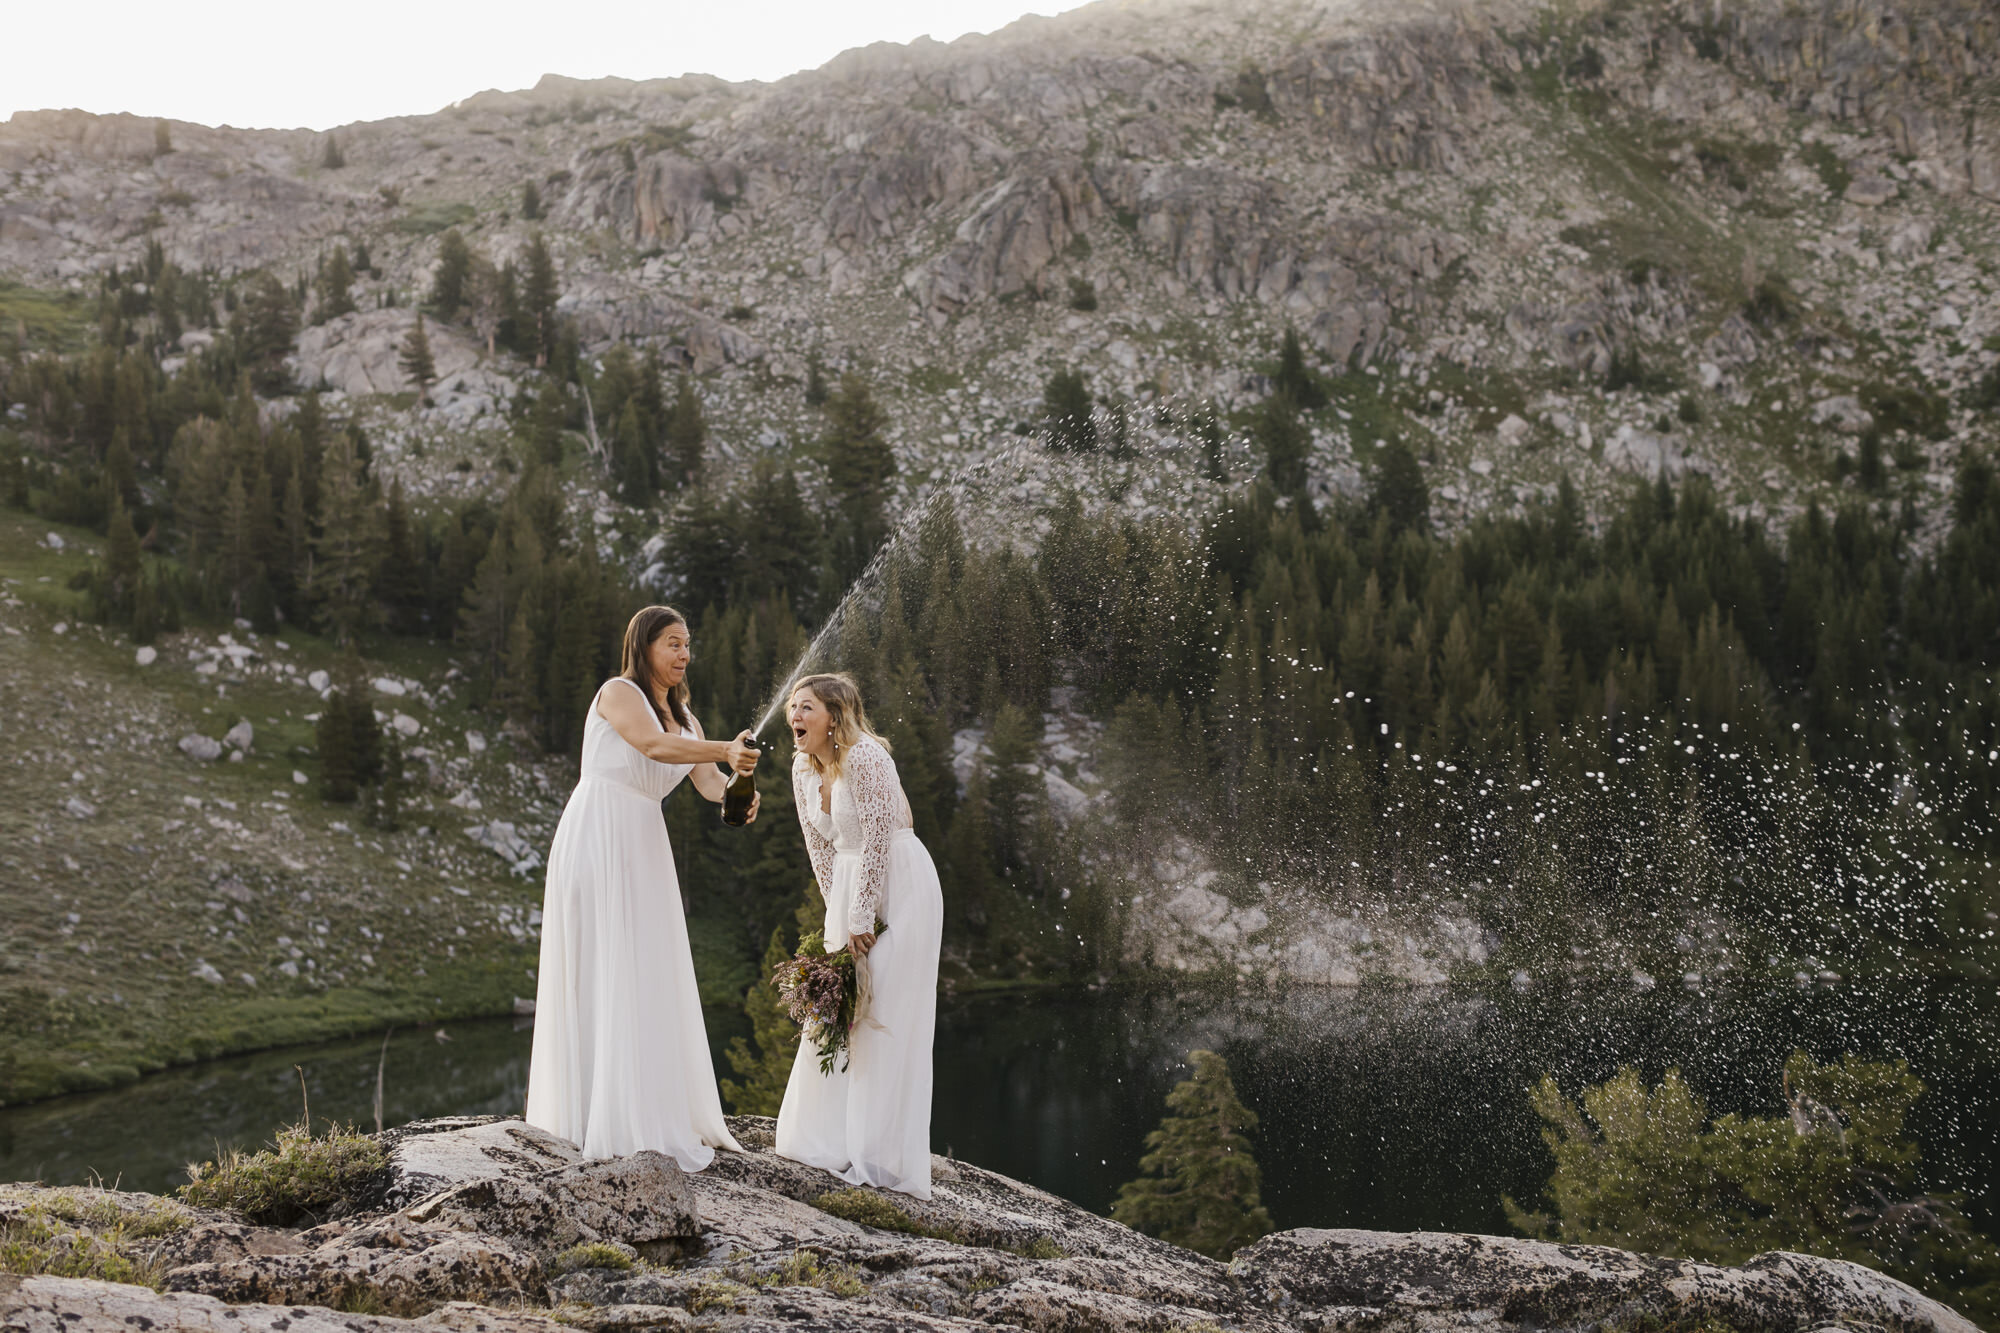 Brides pop champagne to celebrate their mountain elopement